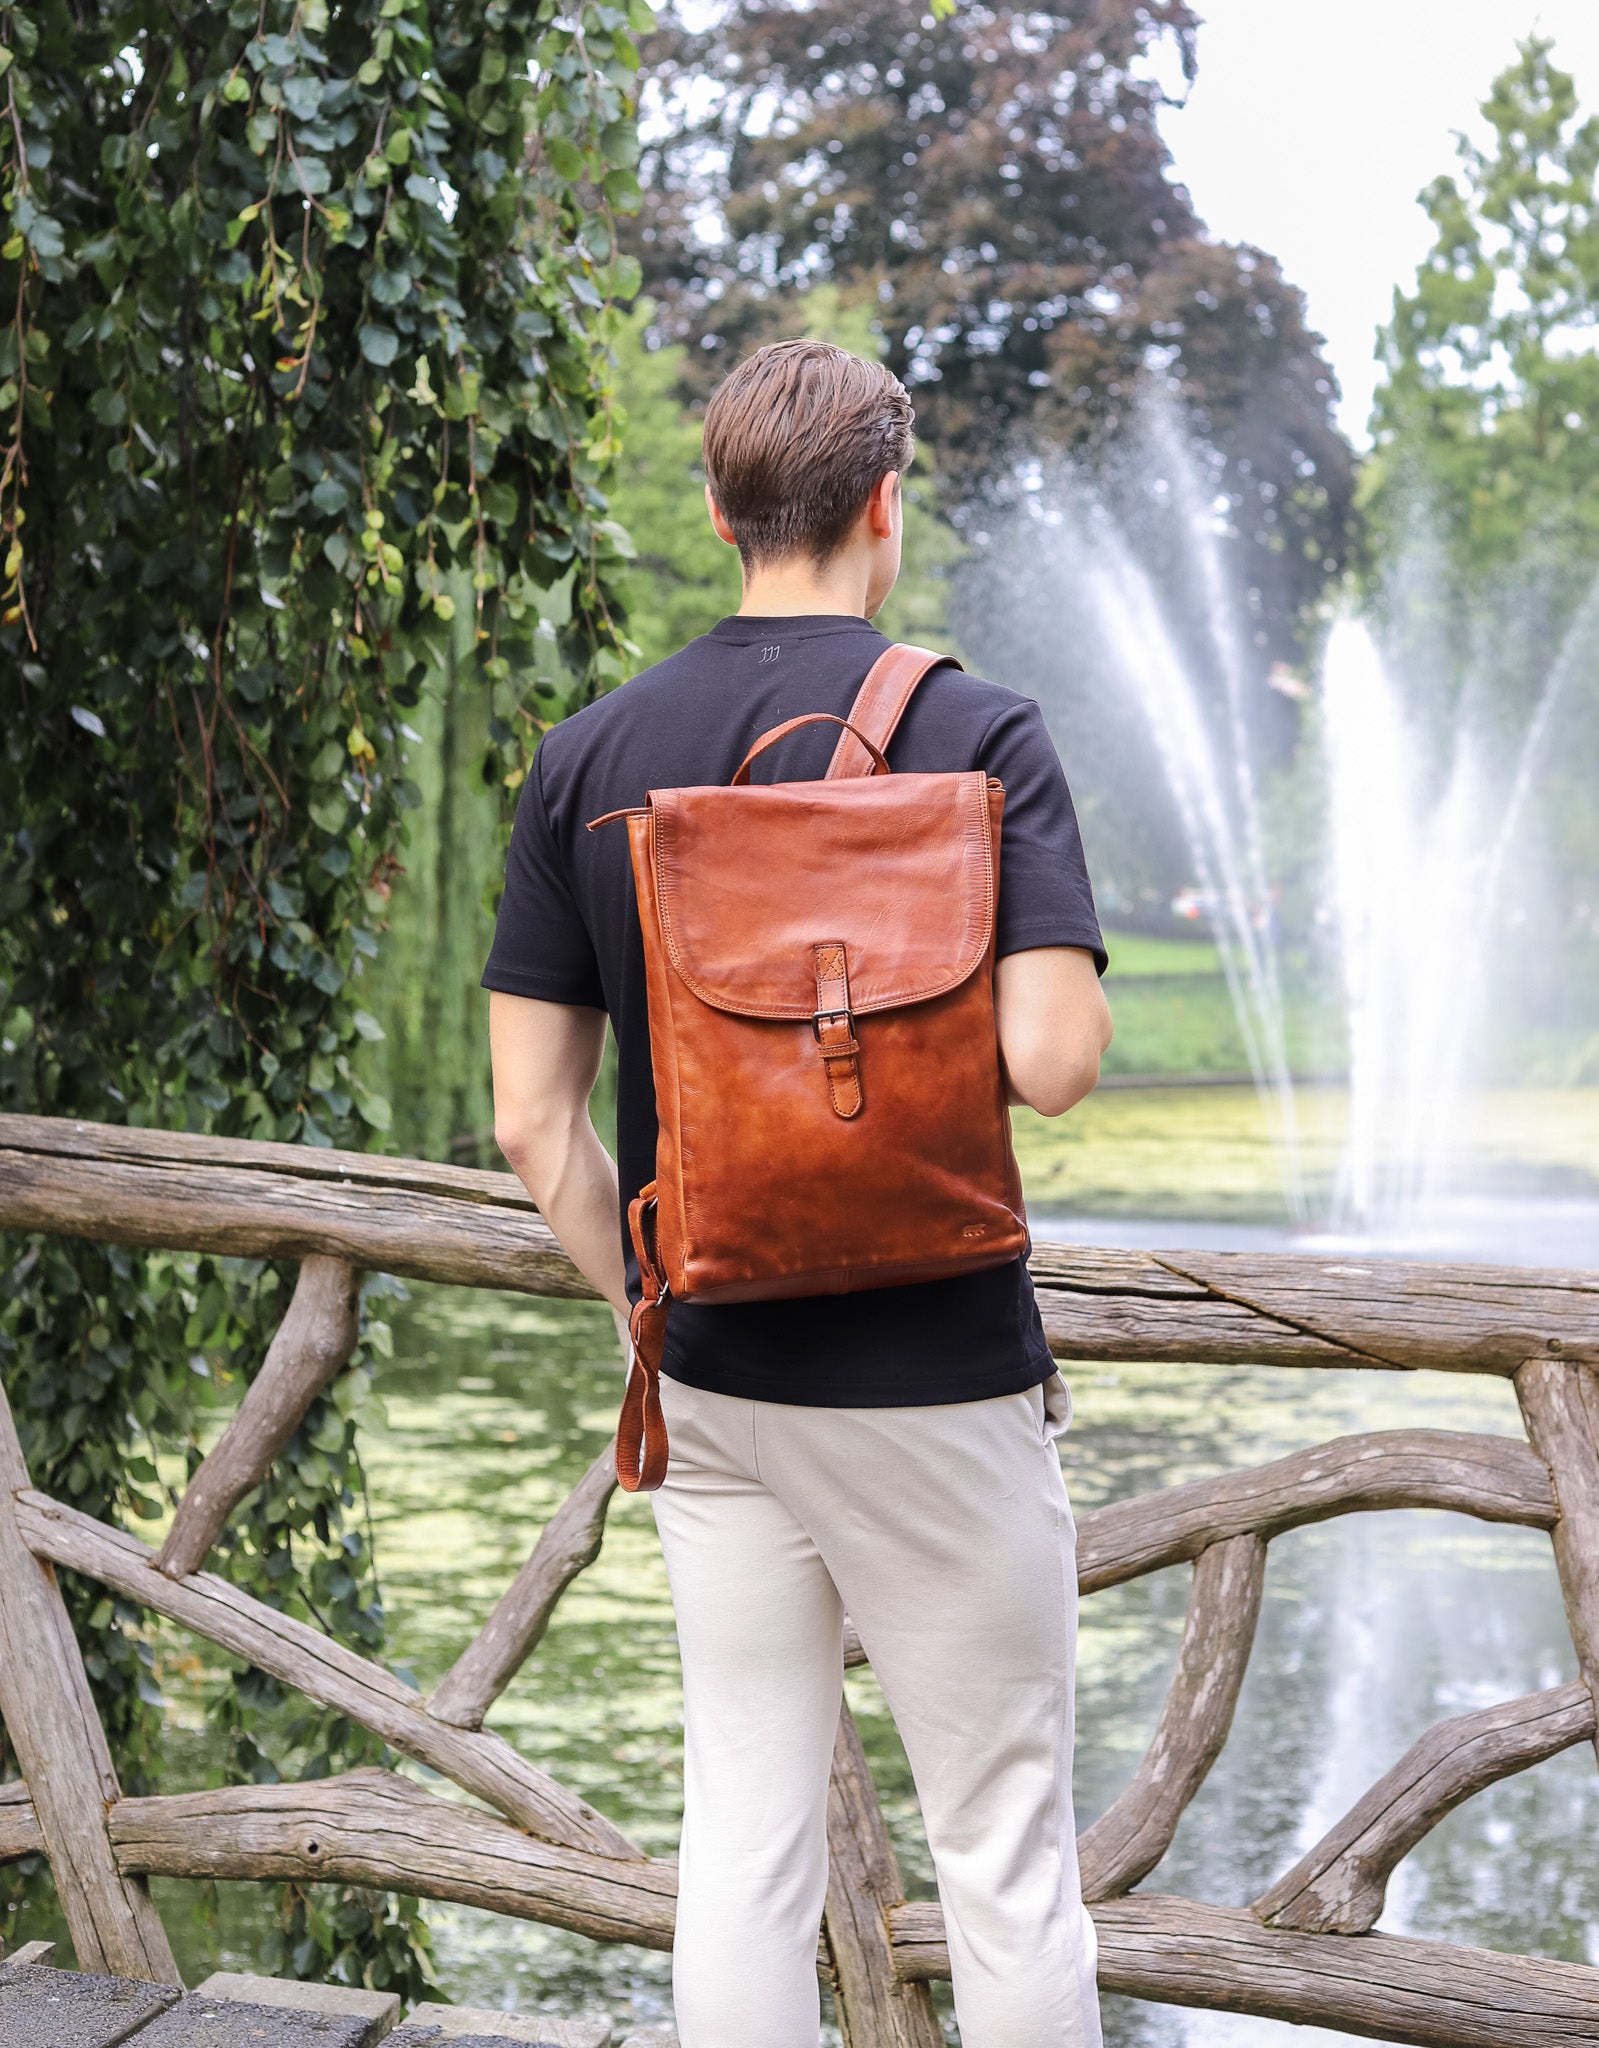 Backpack 'Rob' cognac - CL 36502